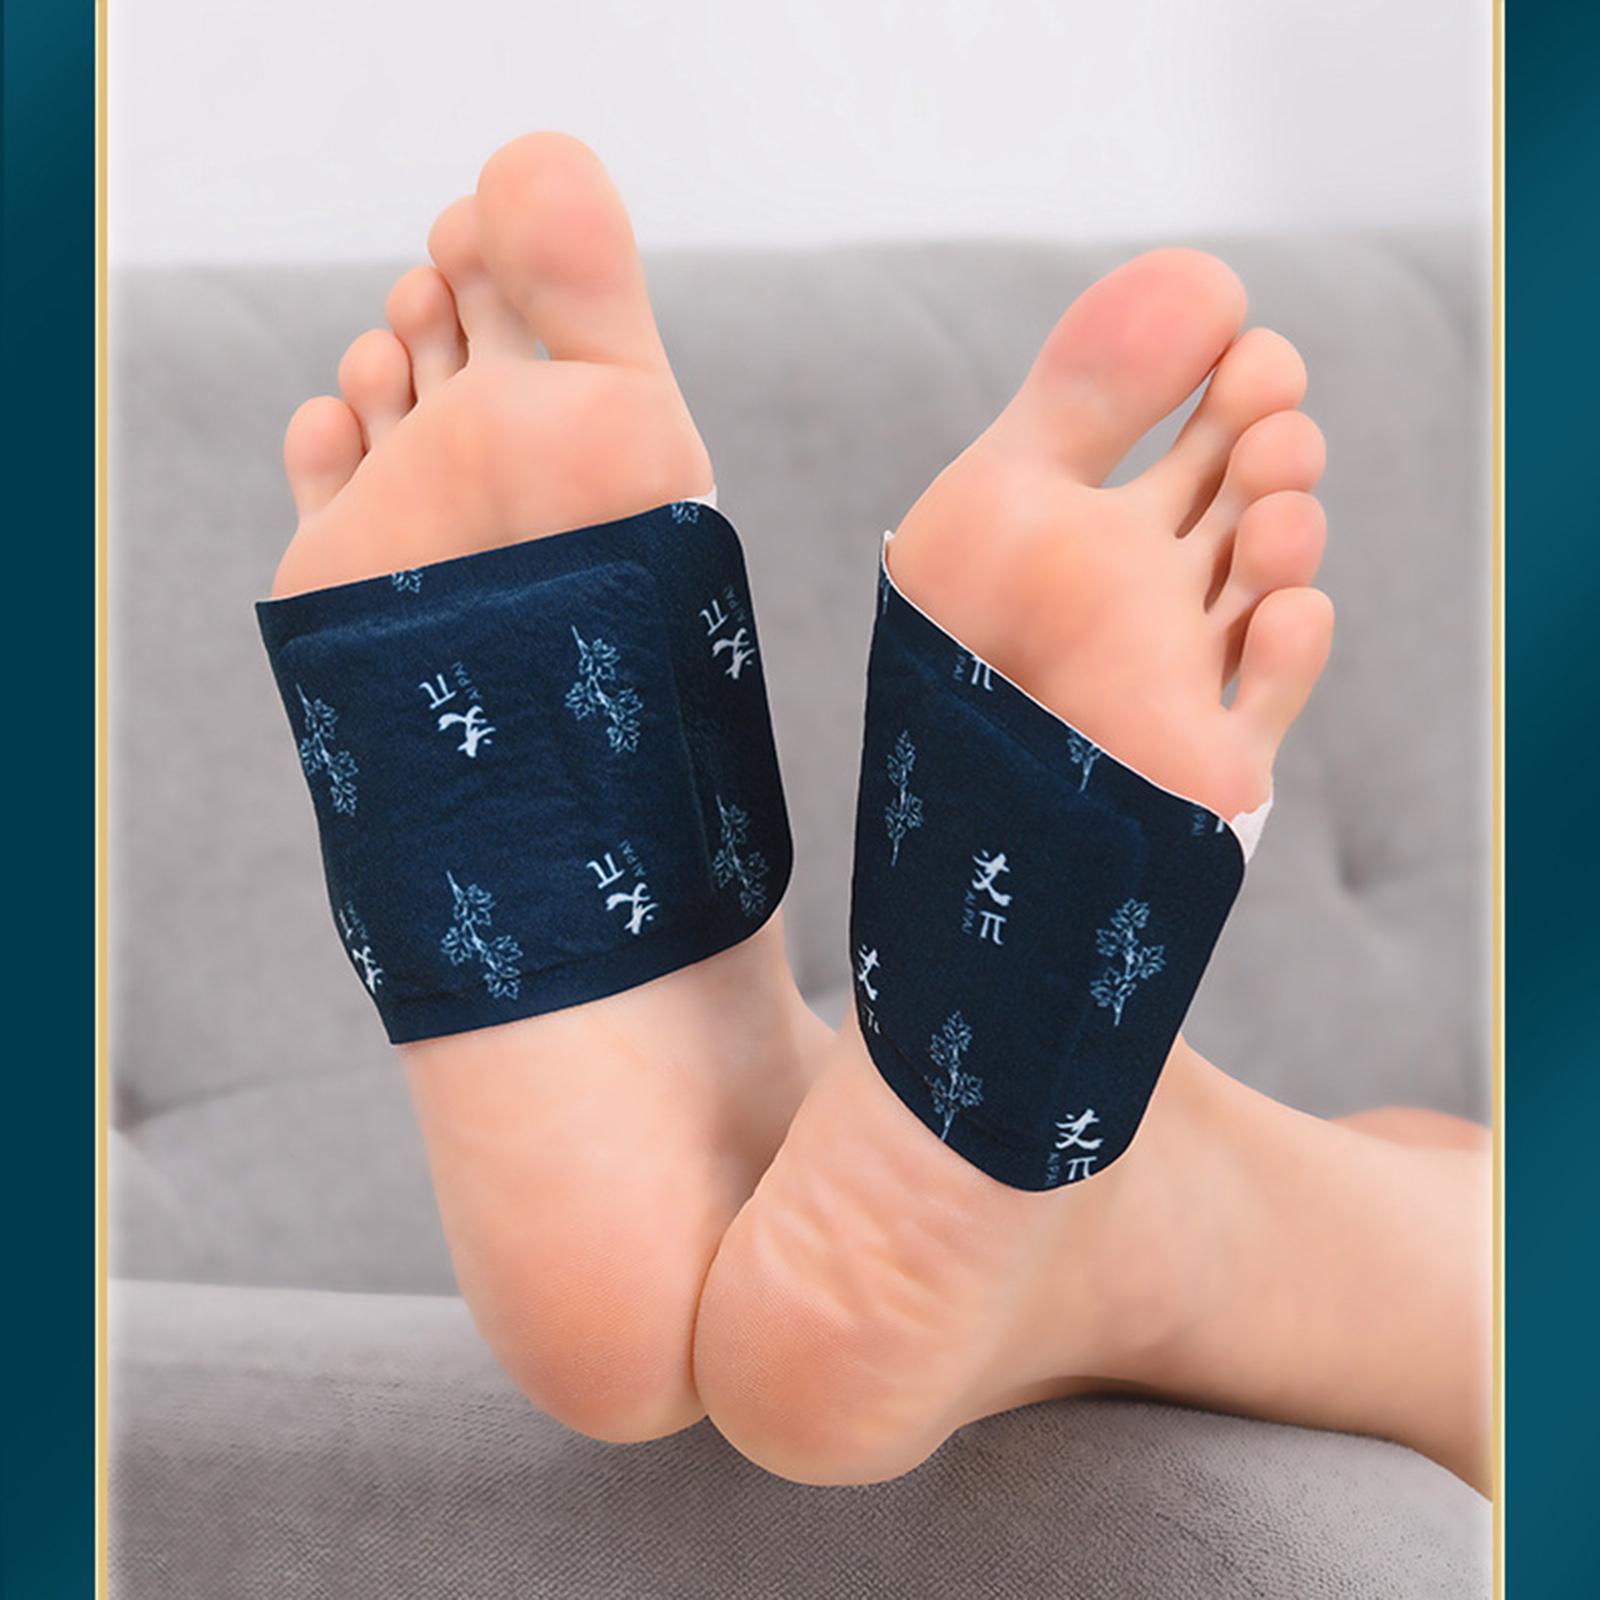 Steam foot patches